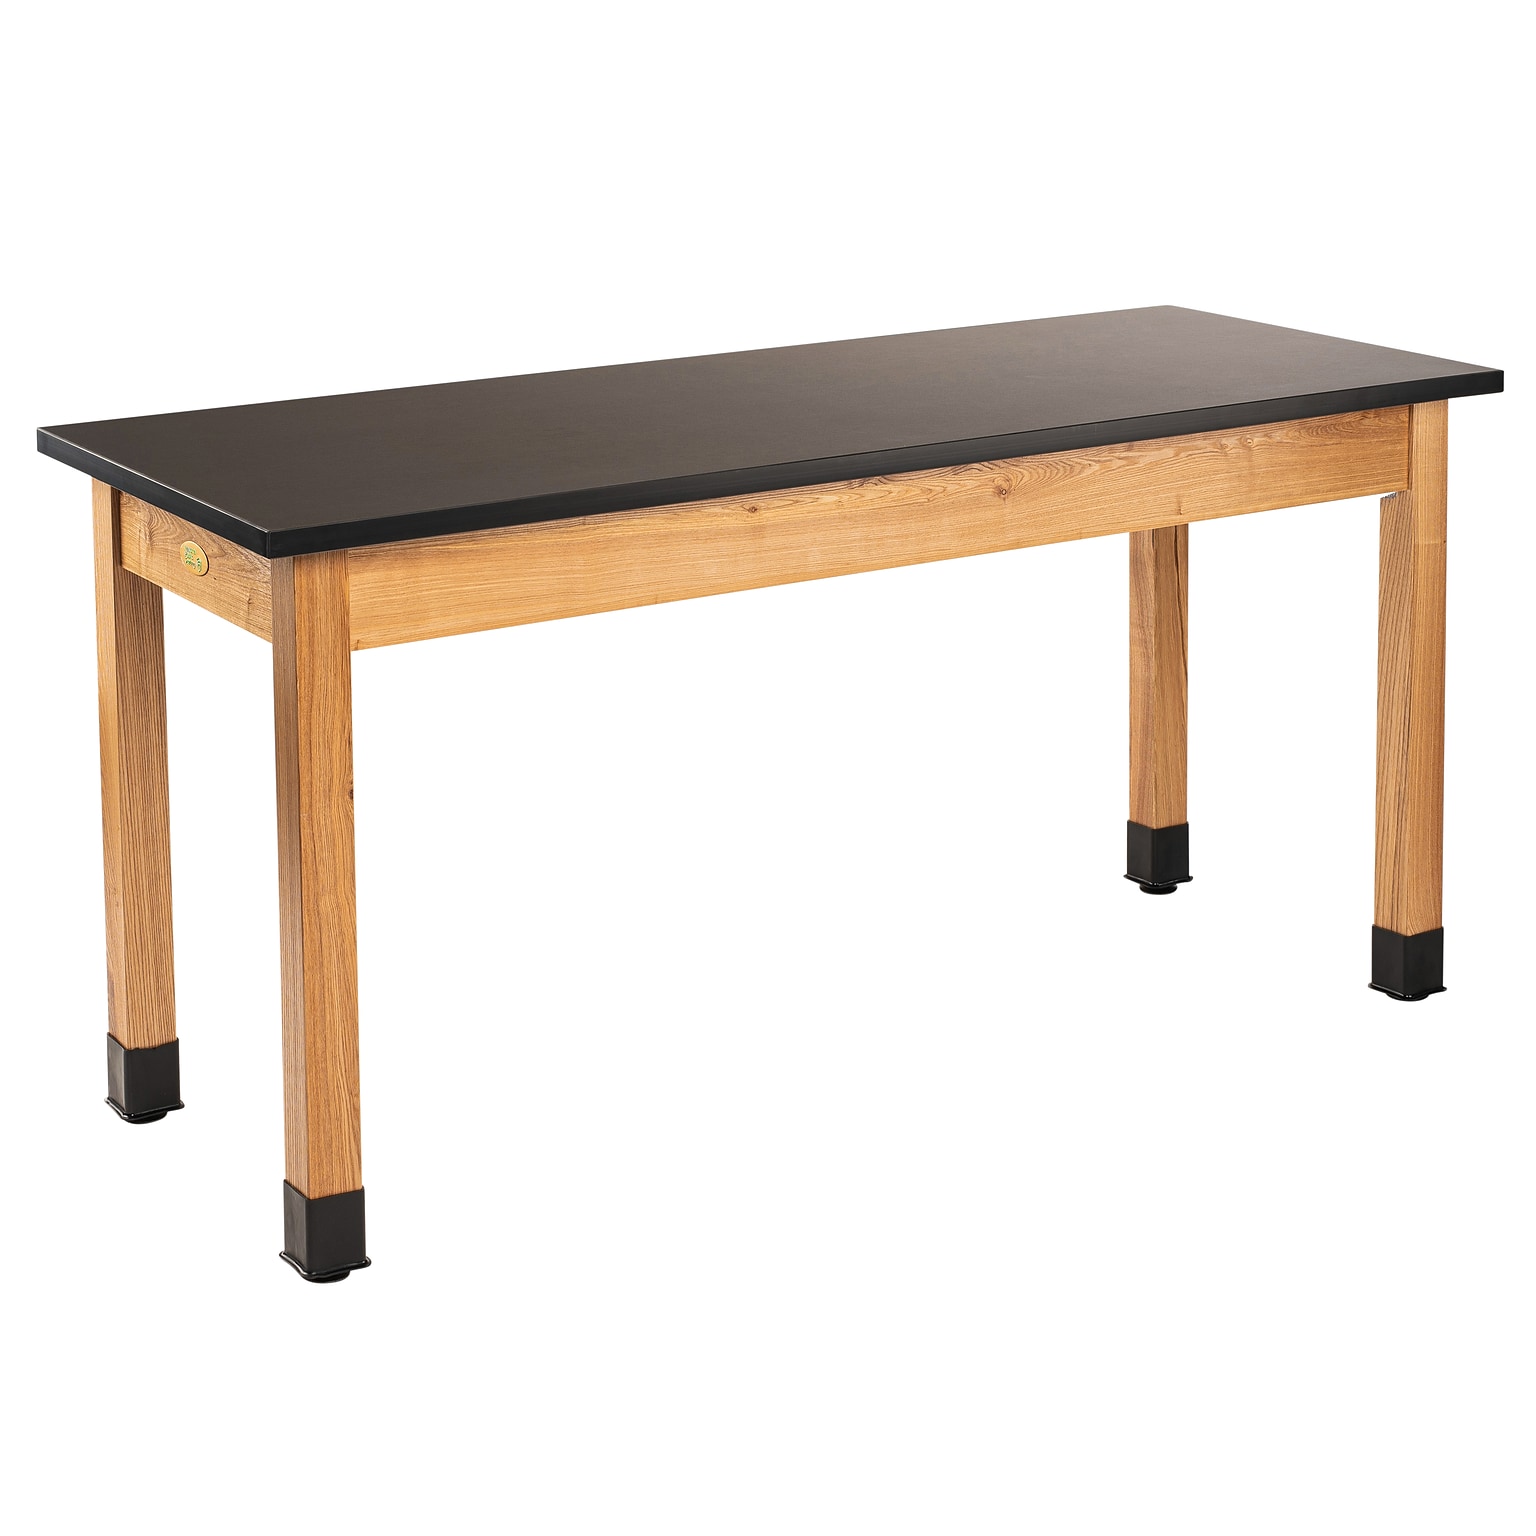 National Public Seating Wood Science Table, Chemical Resistant Series, 30 x 72, Black/Ashwood (SLT1-3072C)